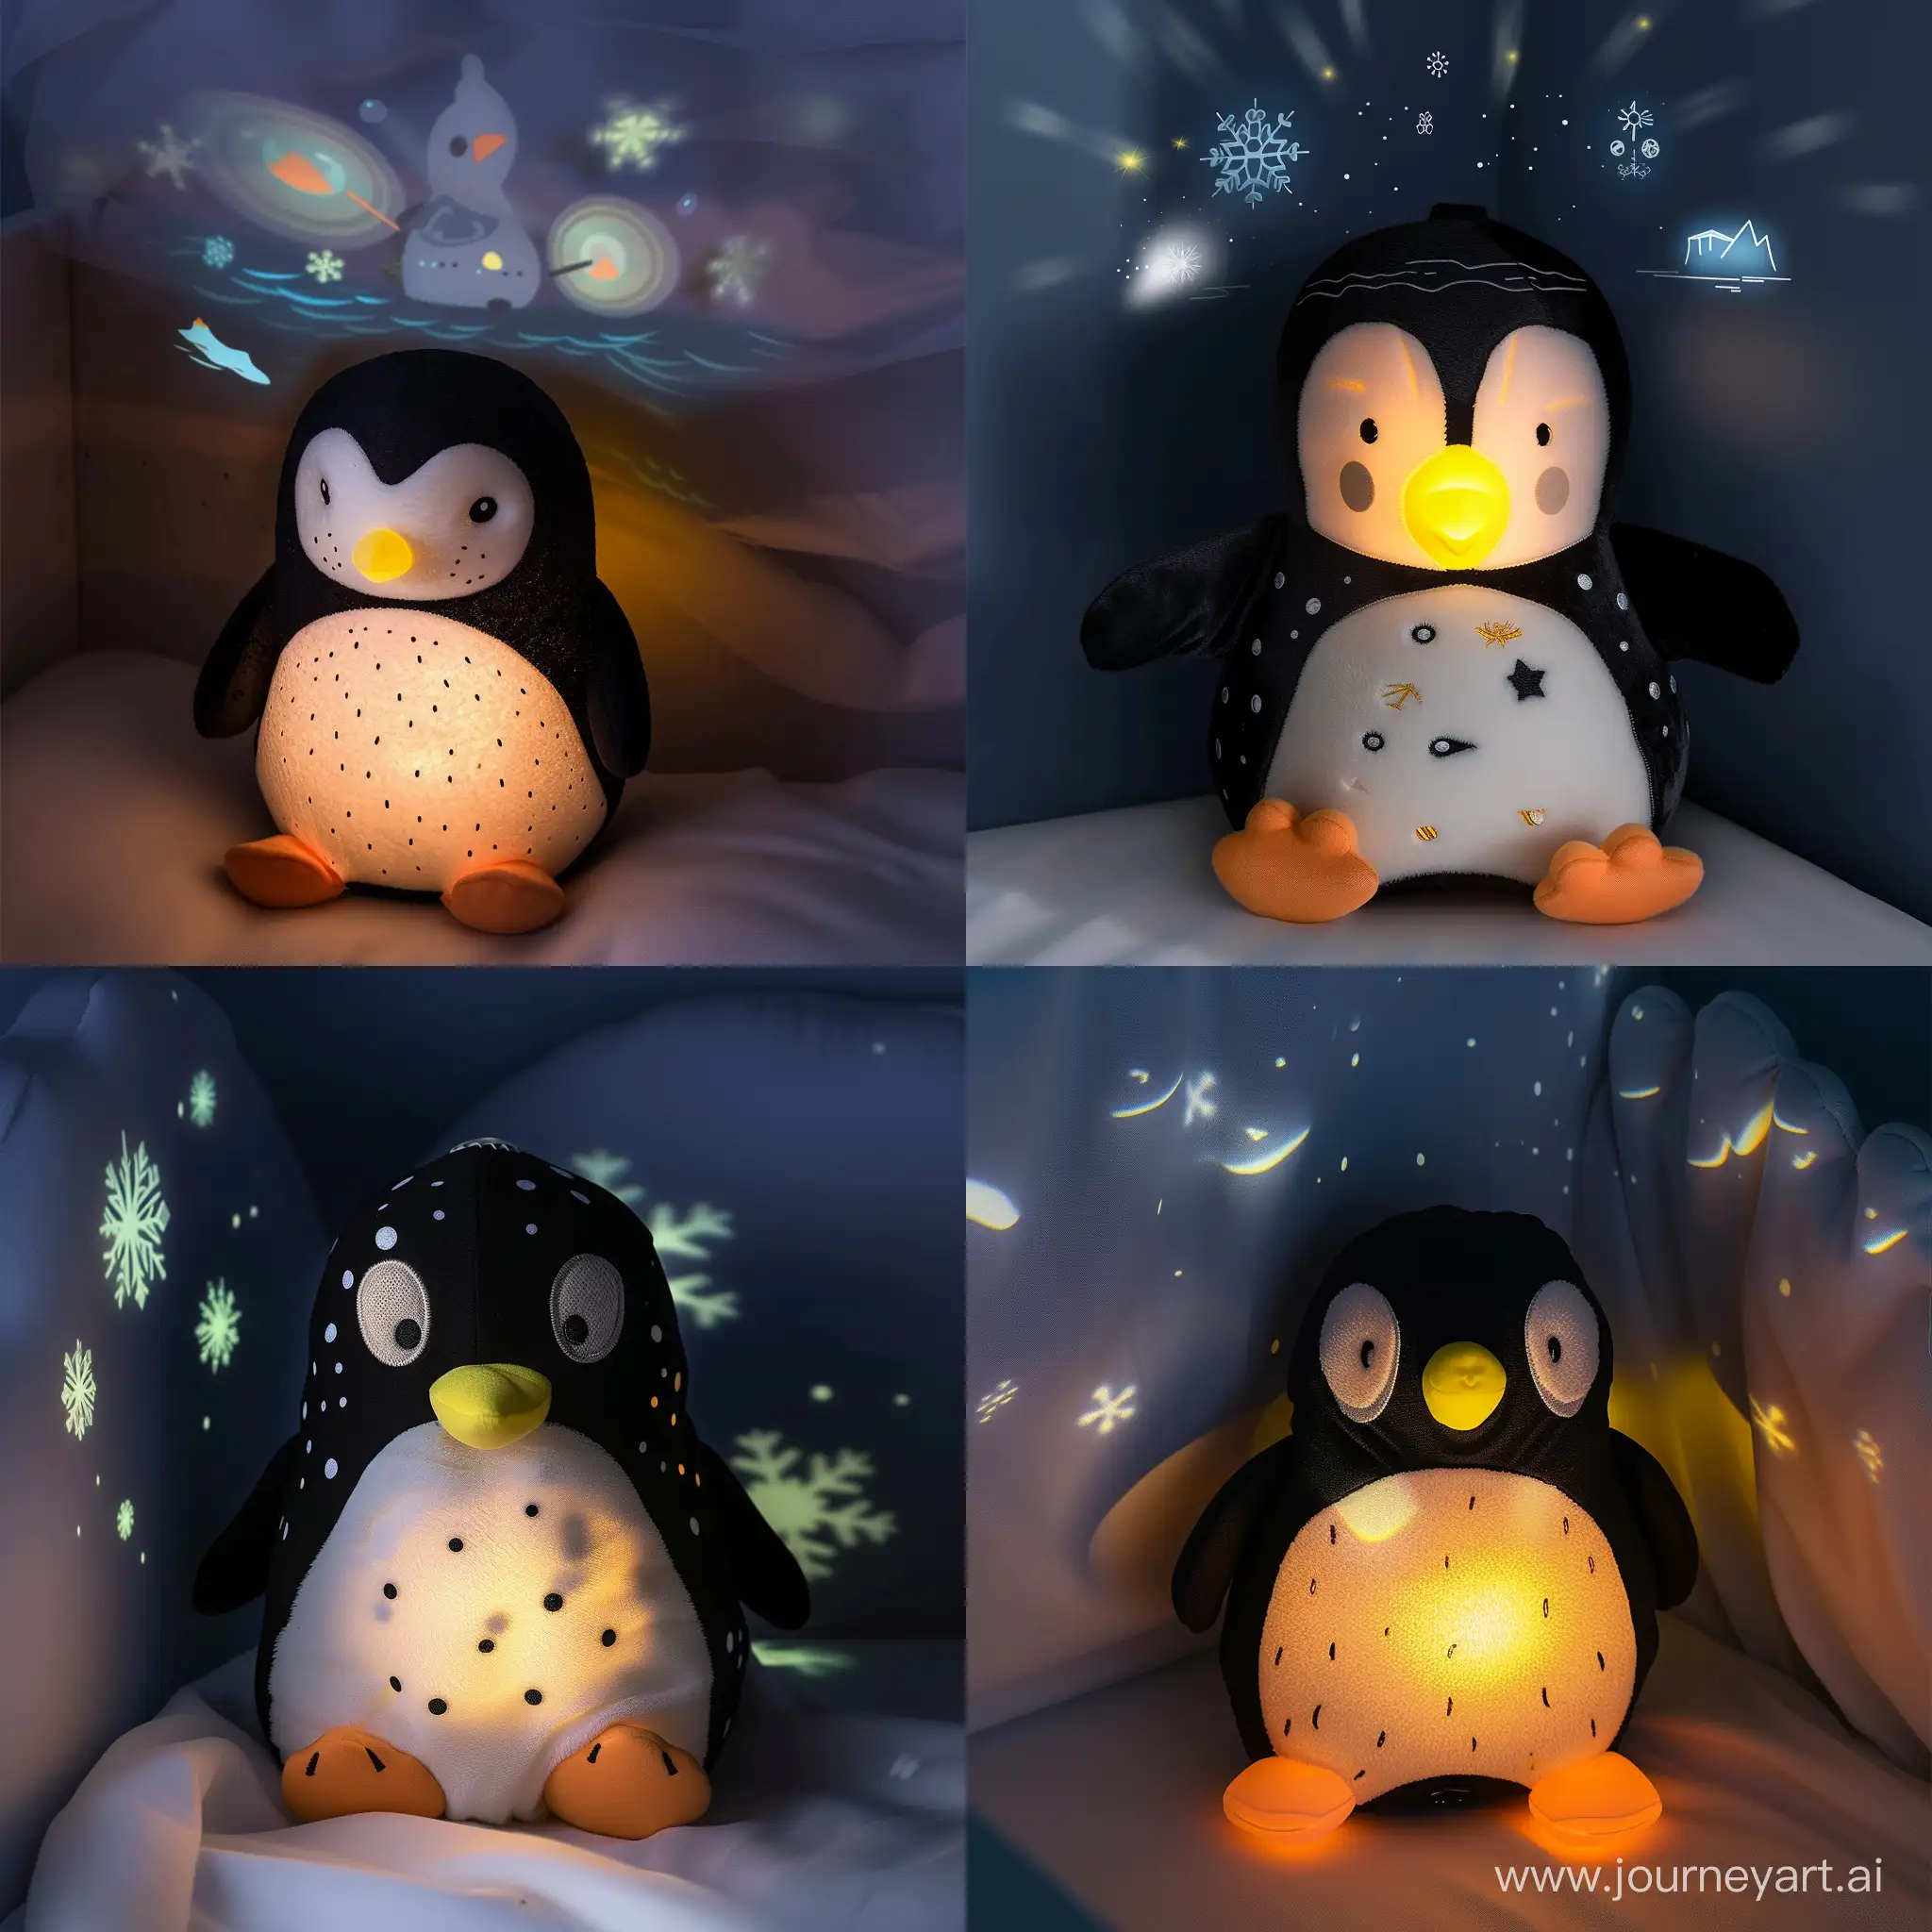 The baby lamp is shaped like a penguin with a black and white body, a yellow beak, and two orange feet. The penguin is made of soft, cuddly fabric that babies can touch and hug. The penguin has a built-in speaker that plays soothing melodies or sounds of the Antarctic, such as waves, wind, or penguin calls. The penguin also has a touch-sensitive surface that allows the baby or the parent to change the colour and brightness of the light by tapping or swiping. The penguin can project different images or shapes on the wall or the ceiling, such as snowflakes, icebergs, or other penguins, that create a cozy and playful atmosphere. The penguin has a sensor that adjusts the light according to the room's darkness, providing a gentle glow that adapts to different lighting conditions. The penguin is powered by a rechargeable battery that can be charged via a USB cable. The penguin can be placed on a bedside table or a crib or hung on the wall or the ceiling.
